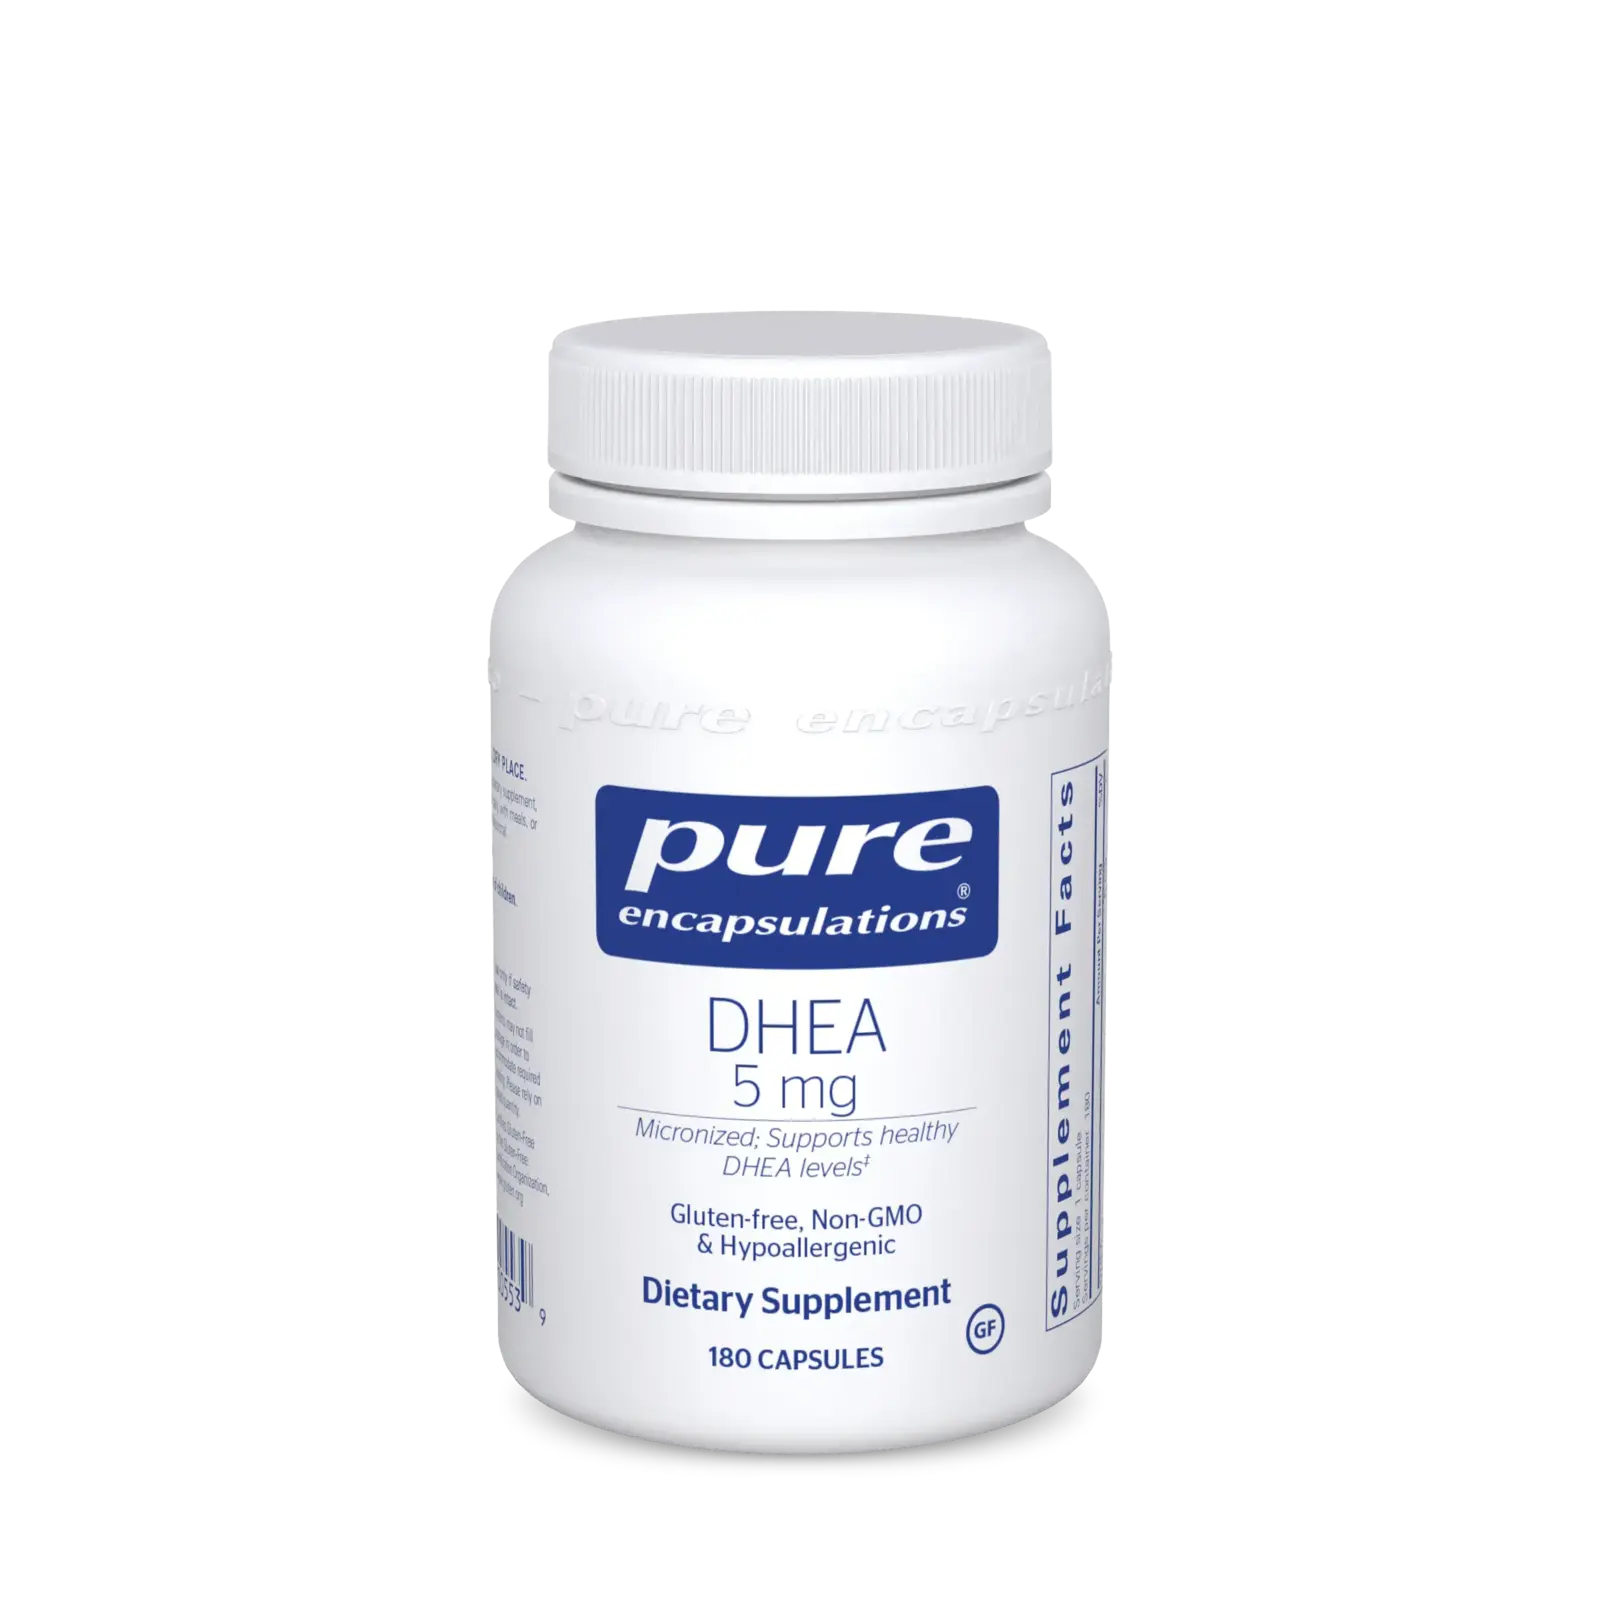 DHEA 5 mg. (old price, combined with other variants)